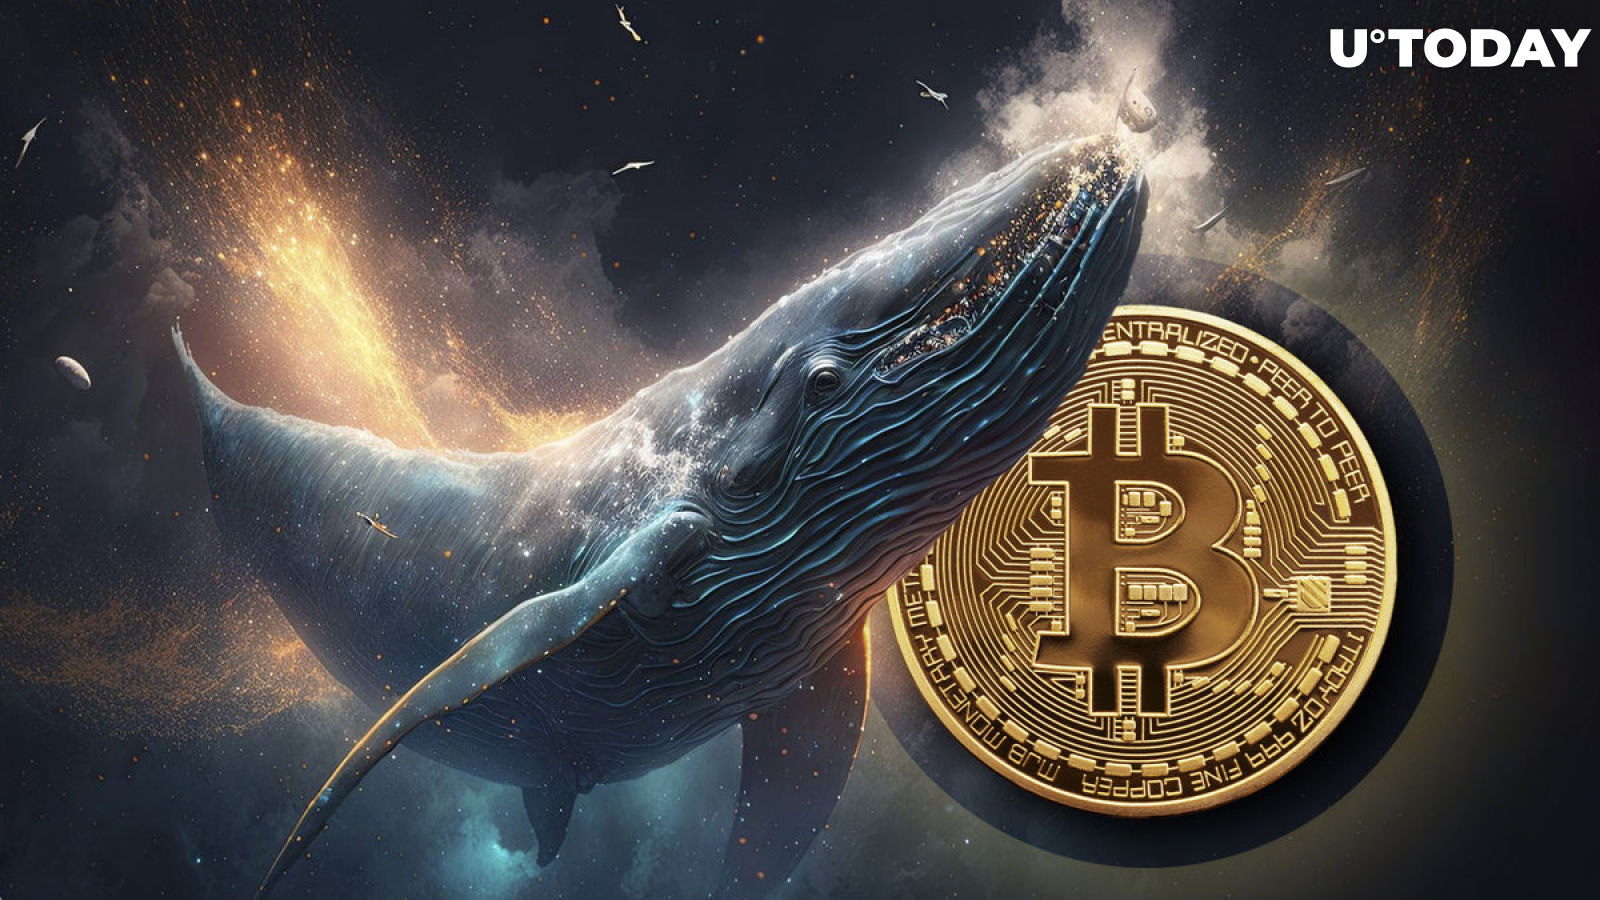 Bitcoin Whales Dump $3 Billion in BTC - Another Price Plunge Coming?